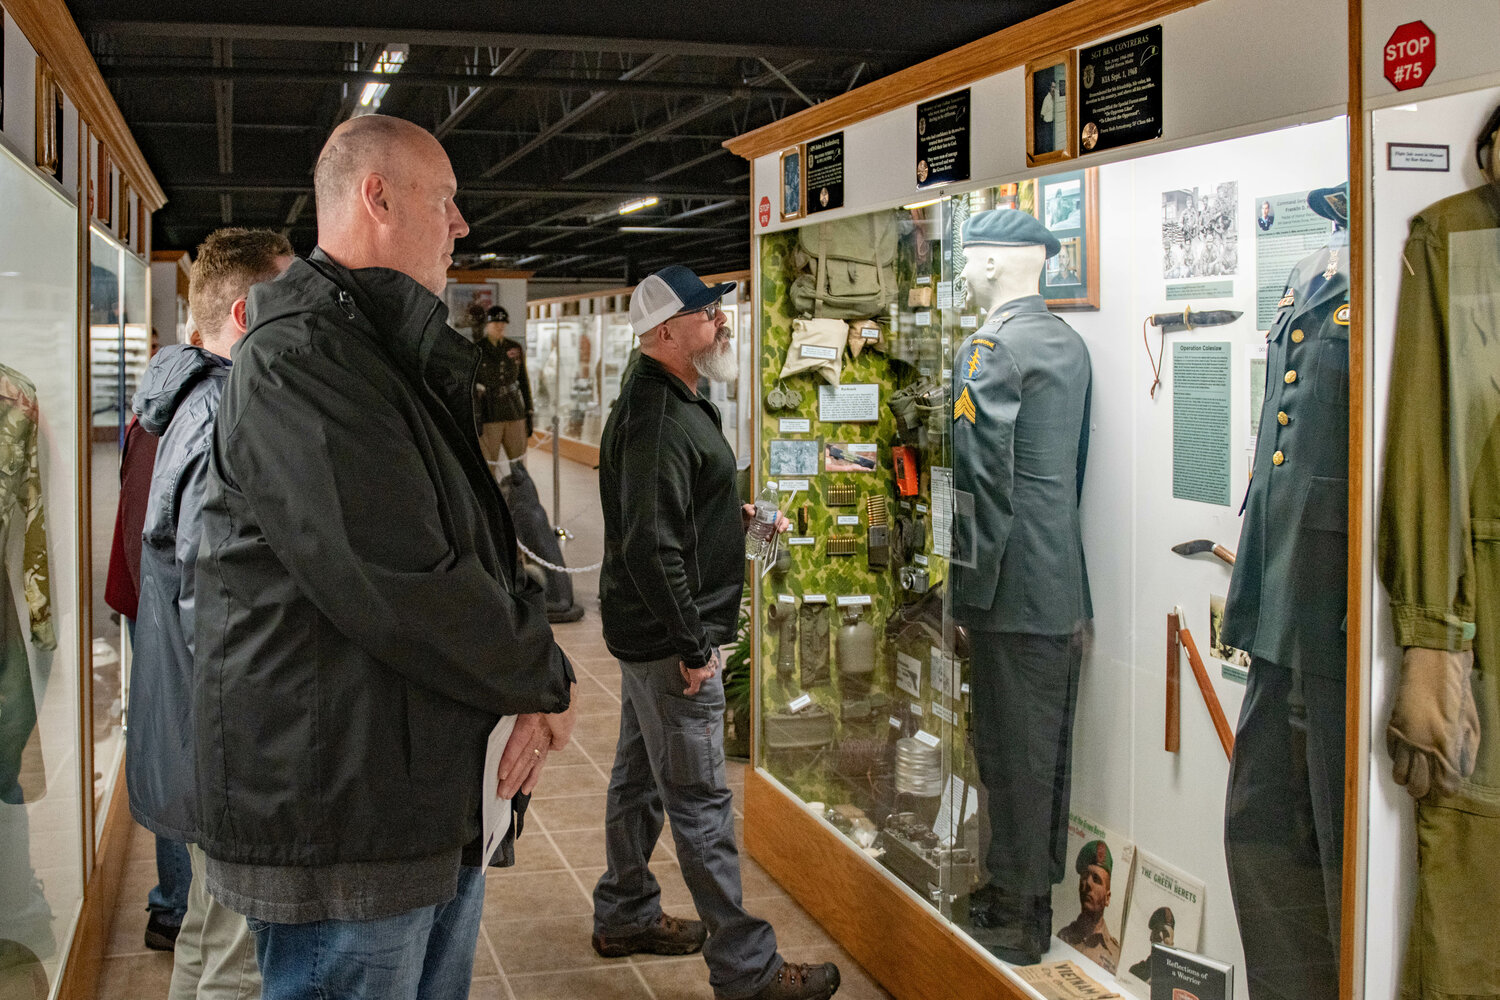 Attendees observe a display honoring Medal of honor recipient Franklin D. Miller after a ceremony at the Veterans Memorial Museum in Chehalis on Jan. 5.